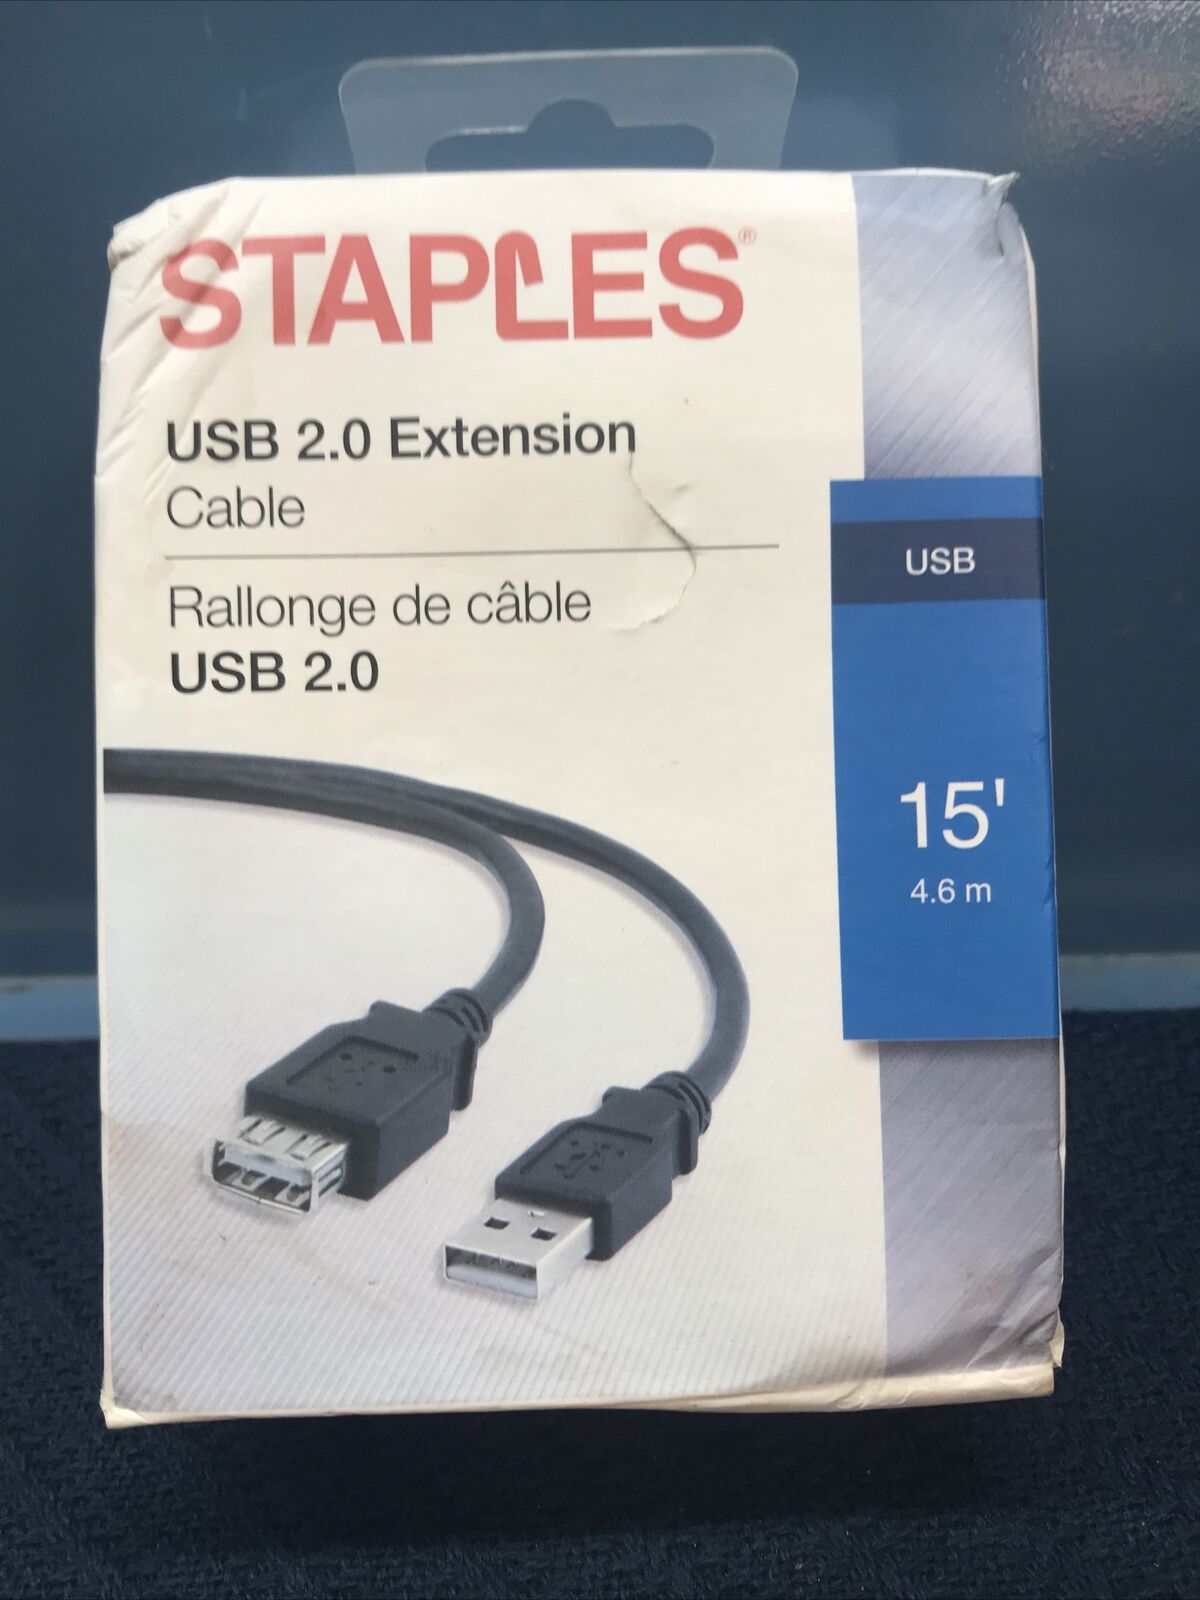 Staples USB 2.0 Extension Cable, 15 Foot, NEW Sealed Package**